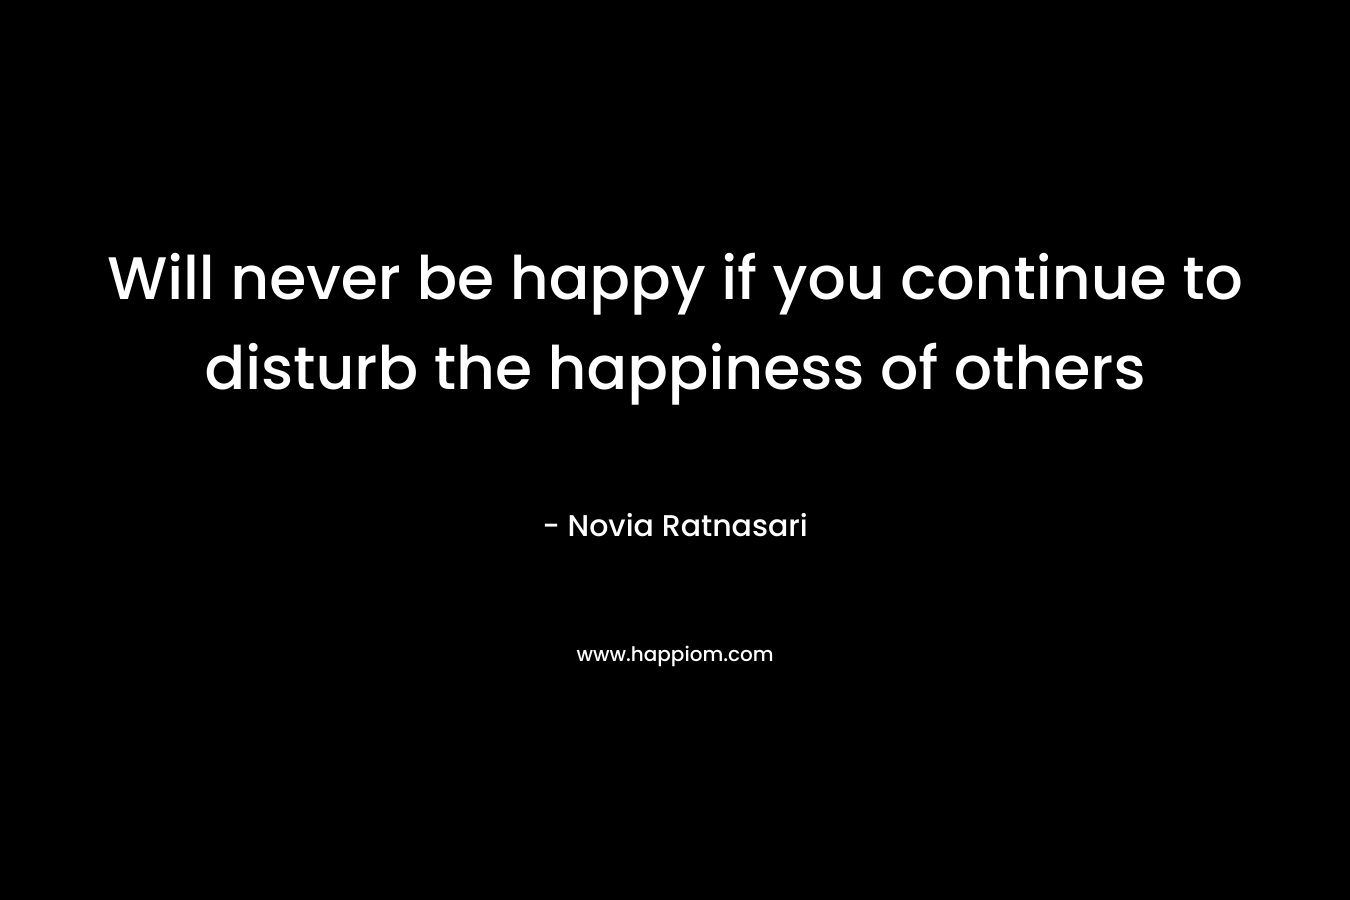 Will never be happy if you continue to disturb the happiness of others